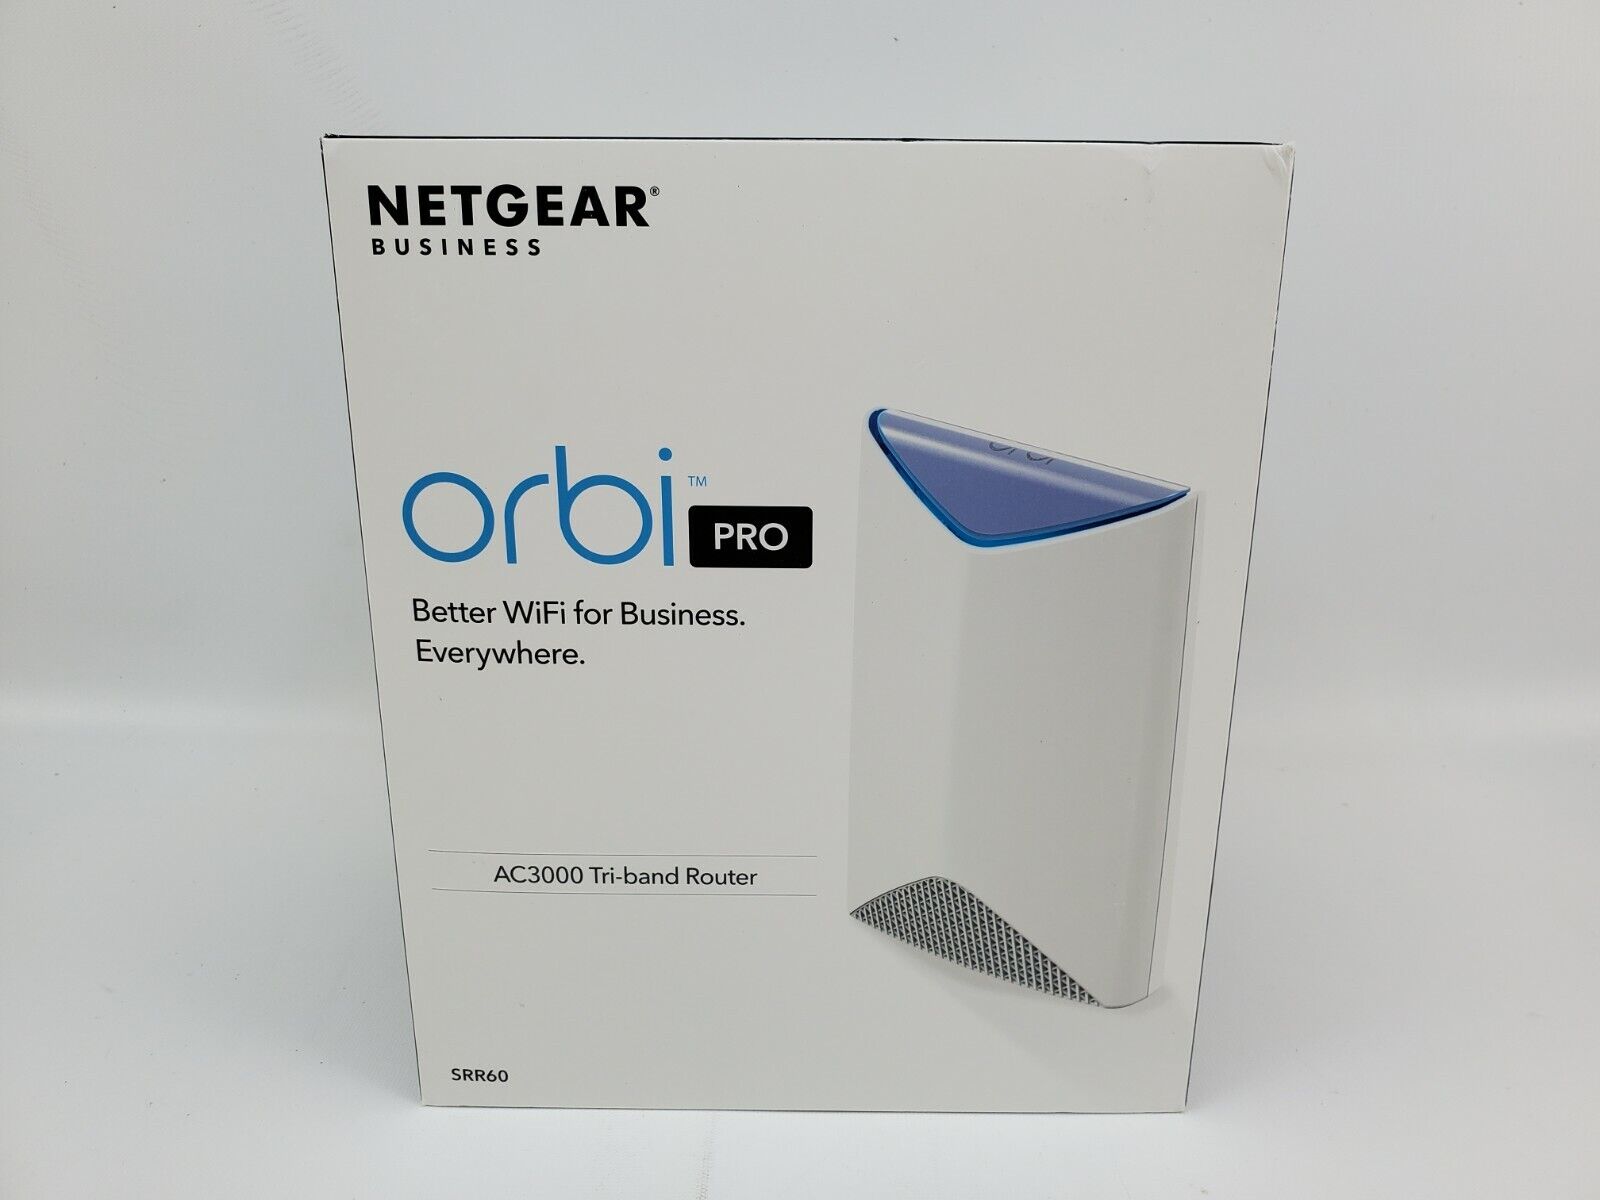 NETGEAR Orbi Pro Tri-Band WiFi Router for Business with 3Gbps speed (SRR60) 